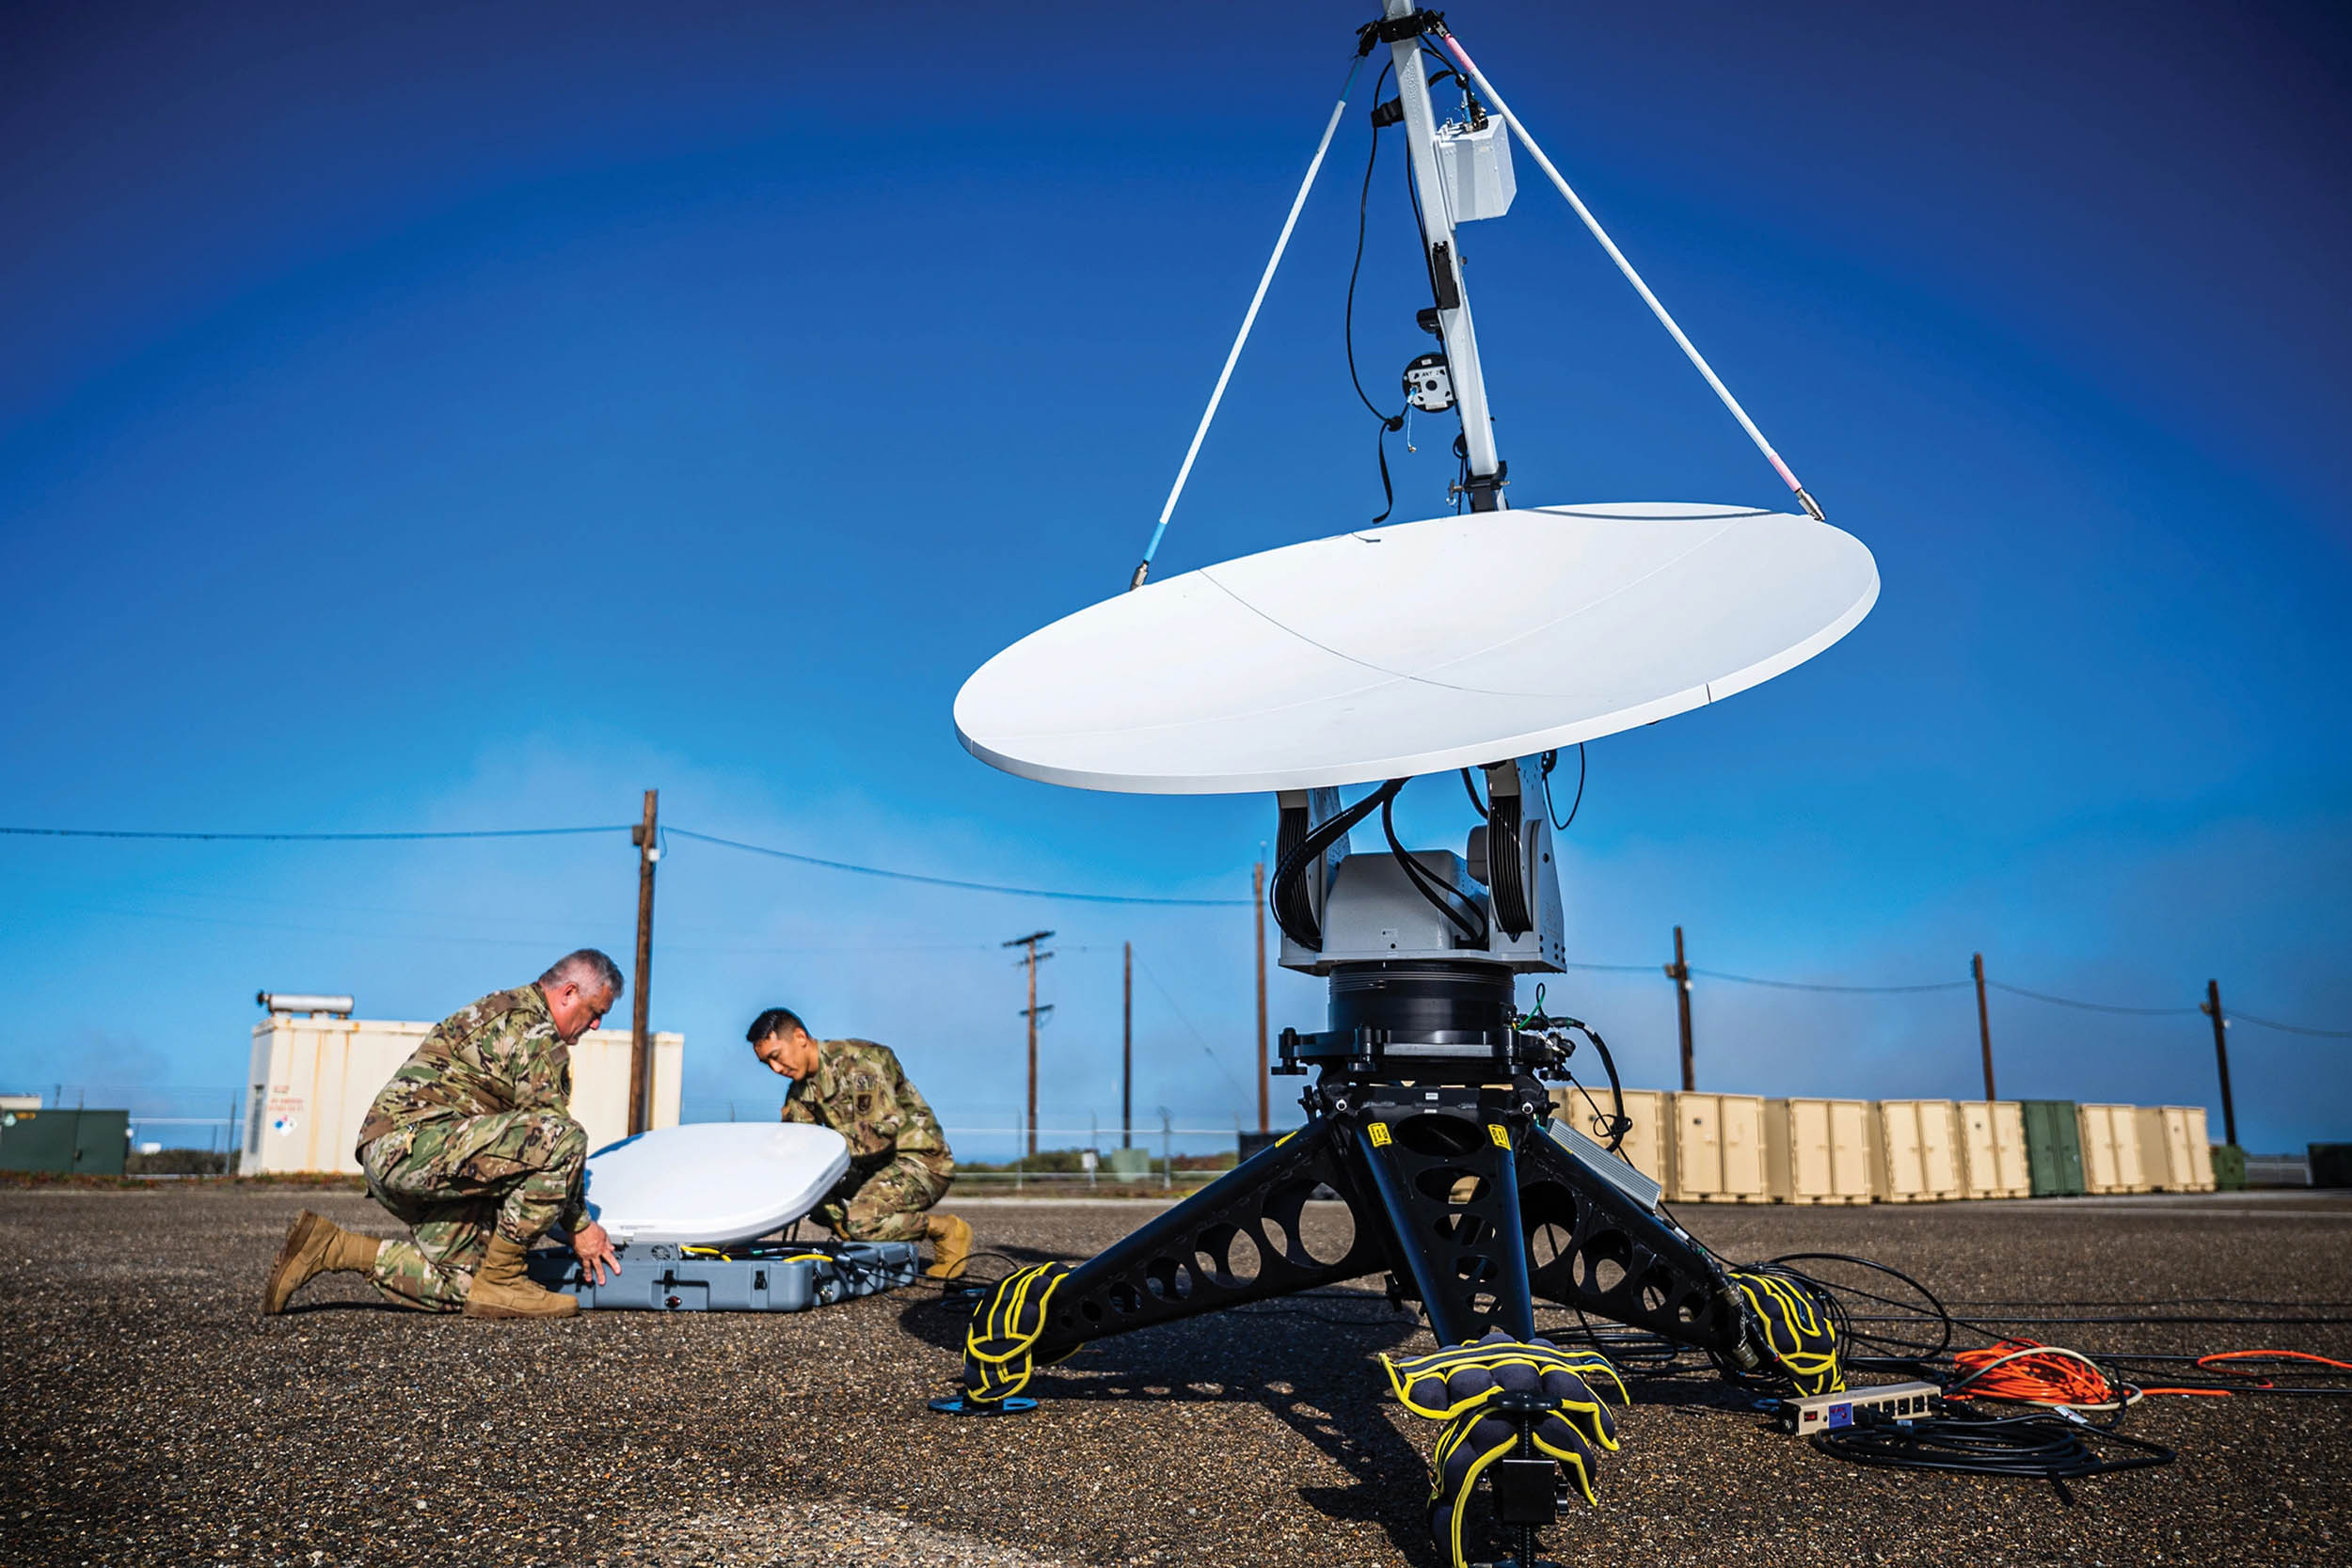 Two members of 216th Space Control Squadron set up antennas as part of “Honey Badger System” during Black Skies 22, designed to rehearse command and control of multiple joint electronic warfare fires, at Vandenberg Space Force Base, California, September 20, 2022 (U.S. Space Force/Luke Kitterman)